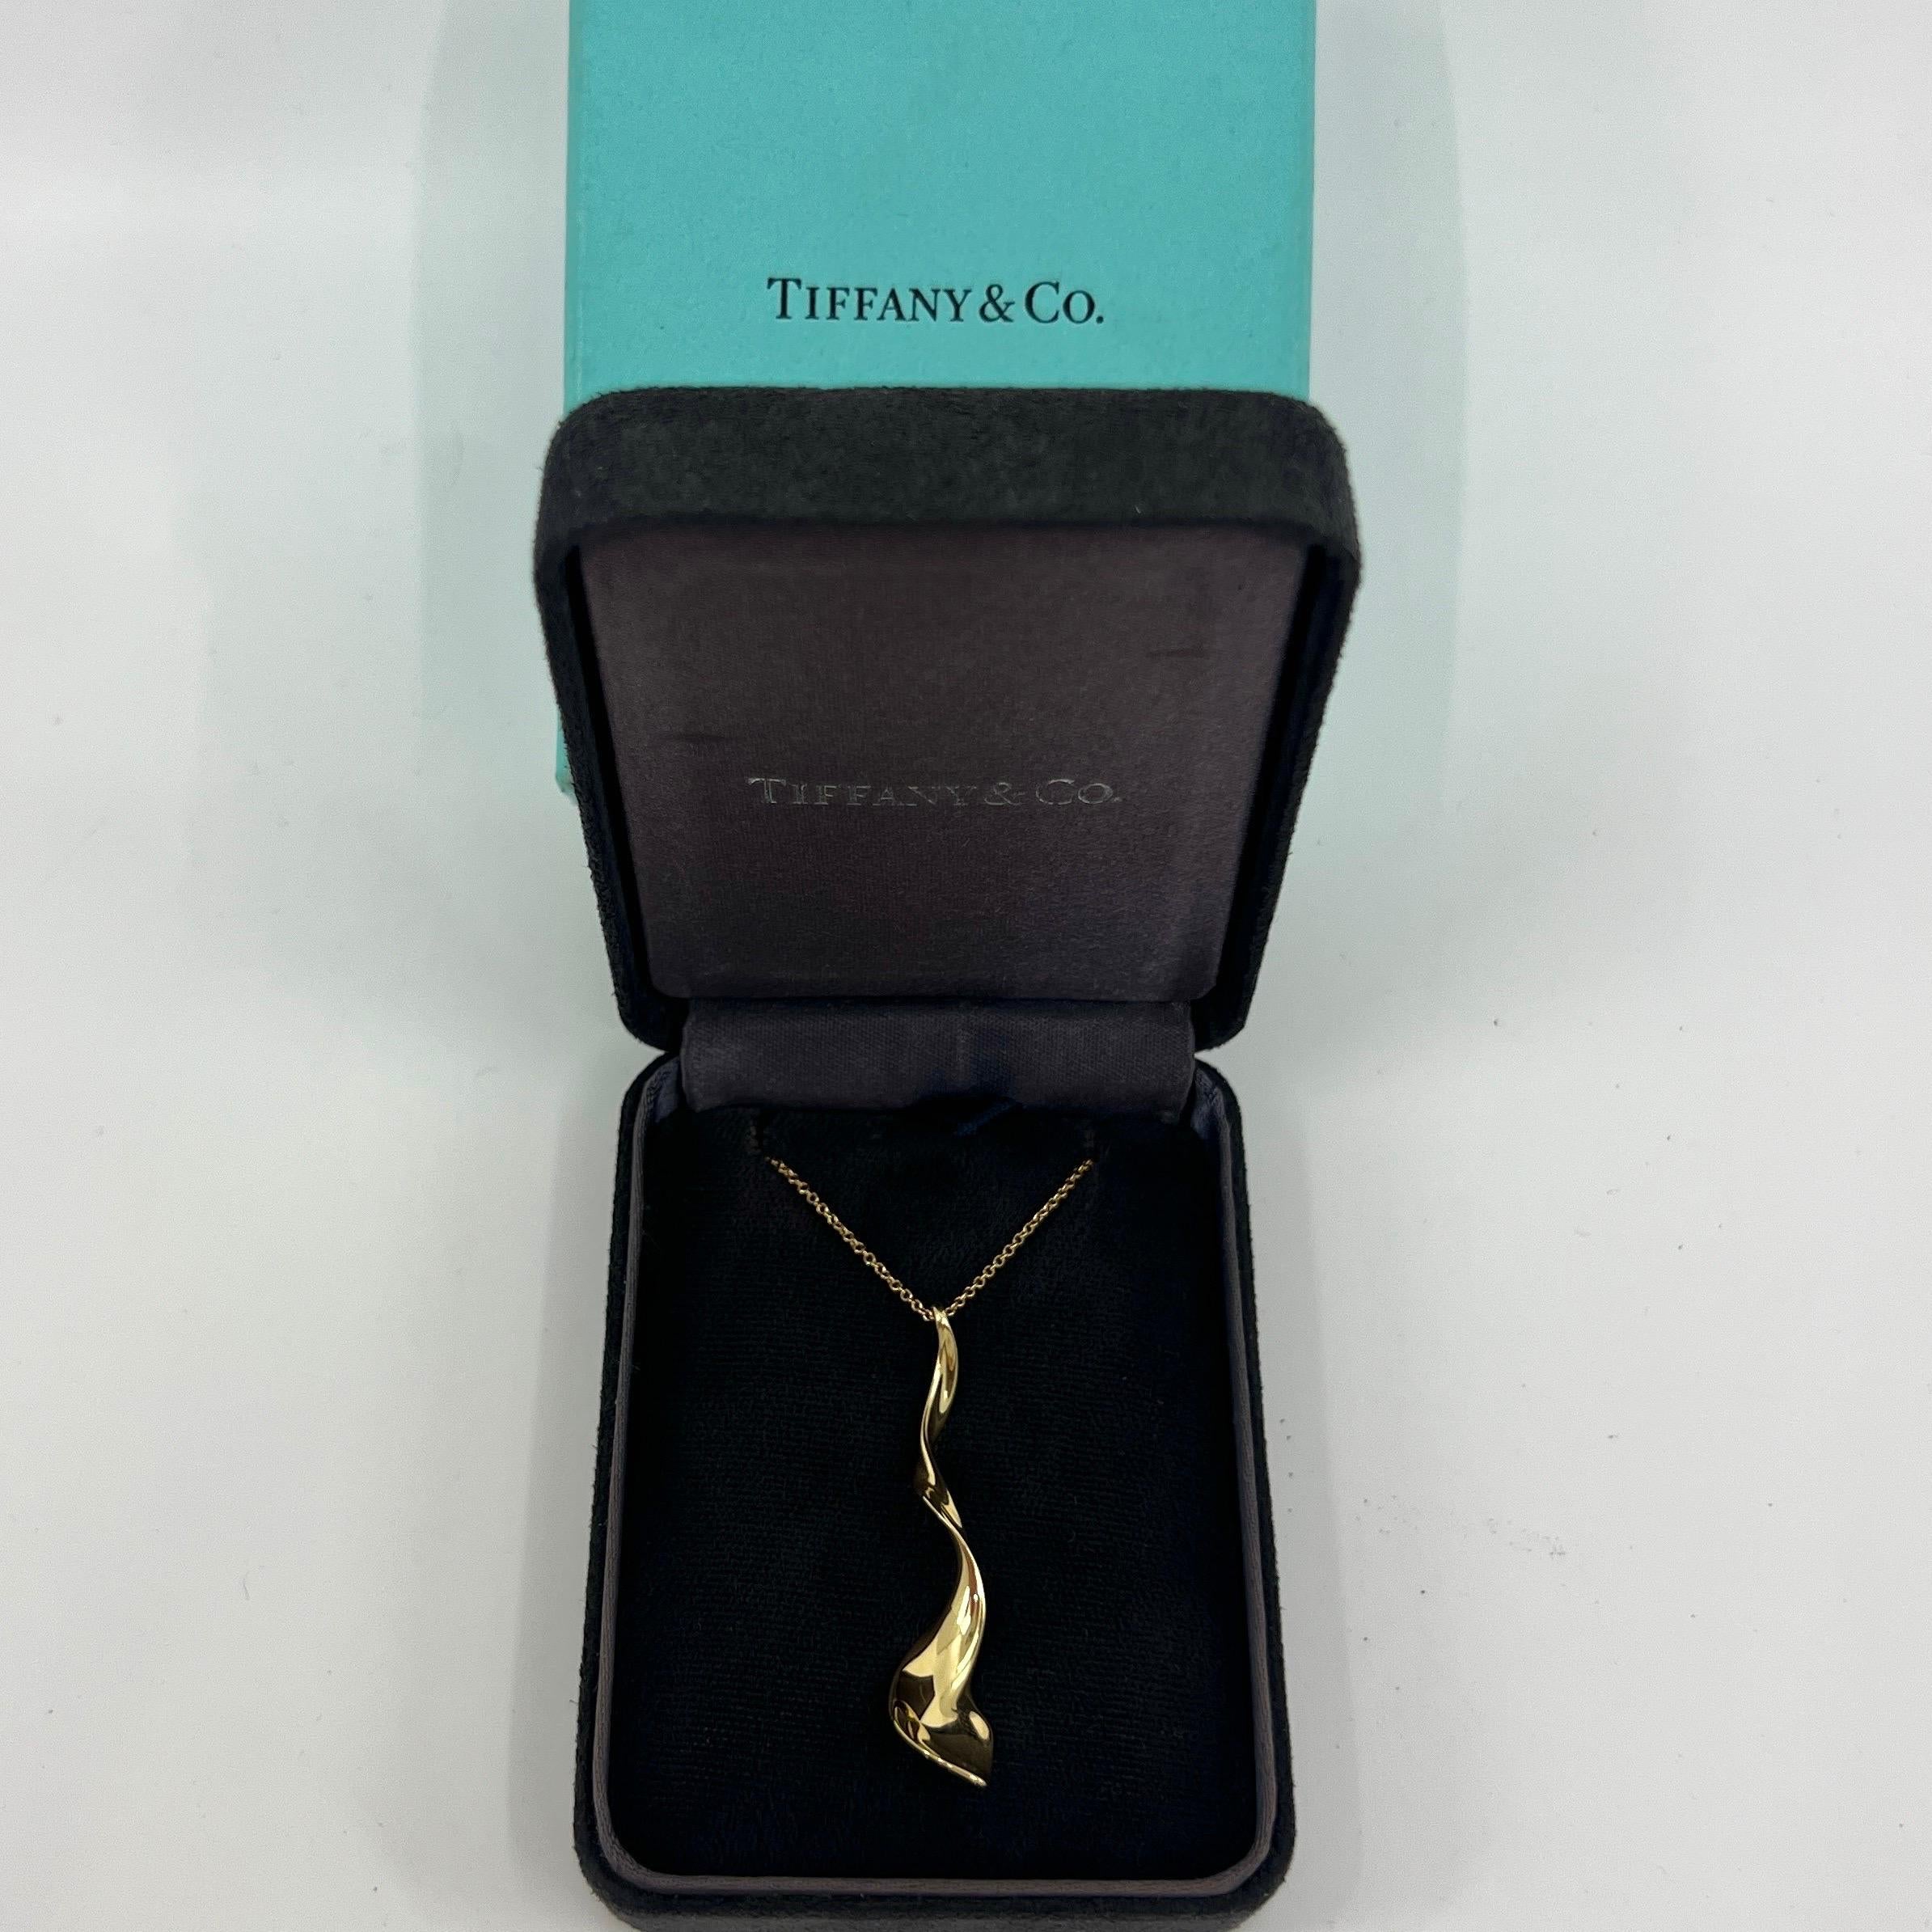 Vintage Tiffany & Co Frank Gehry Orchid Twist Spiral 18k Yellow Gold Pendant Necklace.

A rare piece from the Tiffany & Co collaboration with renowned architect Frank Gehry.

This piece features a twisting spiral gold pendant. Reflecting inspiration